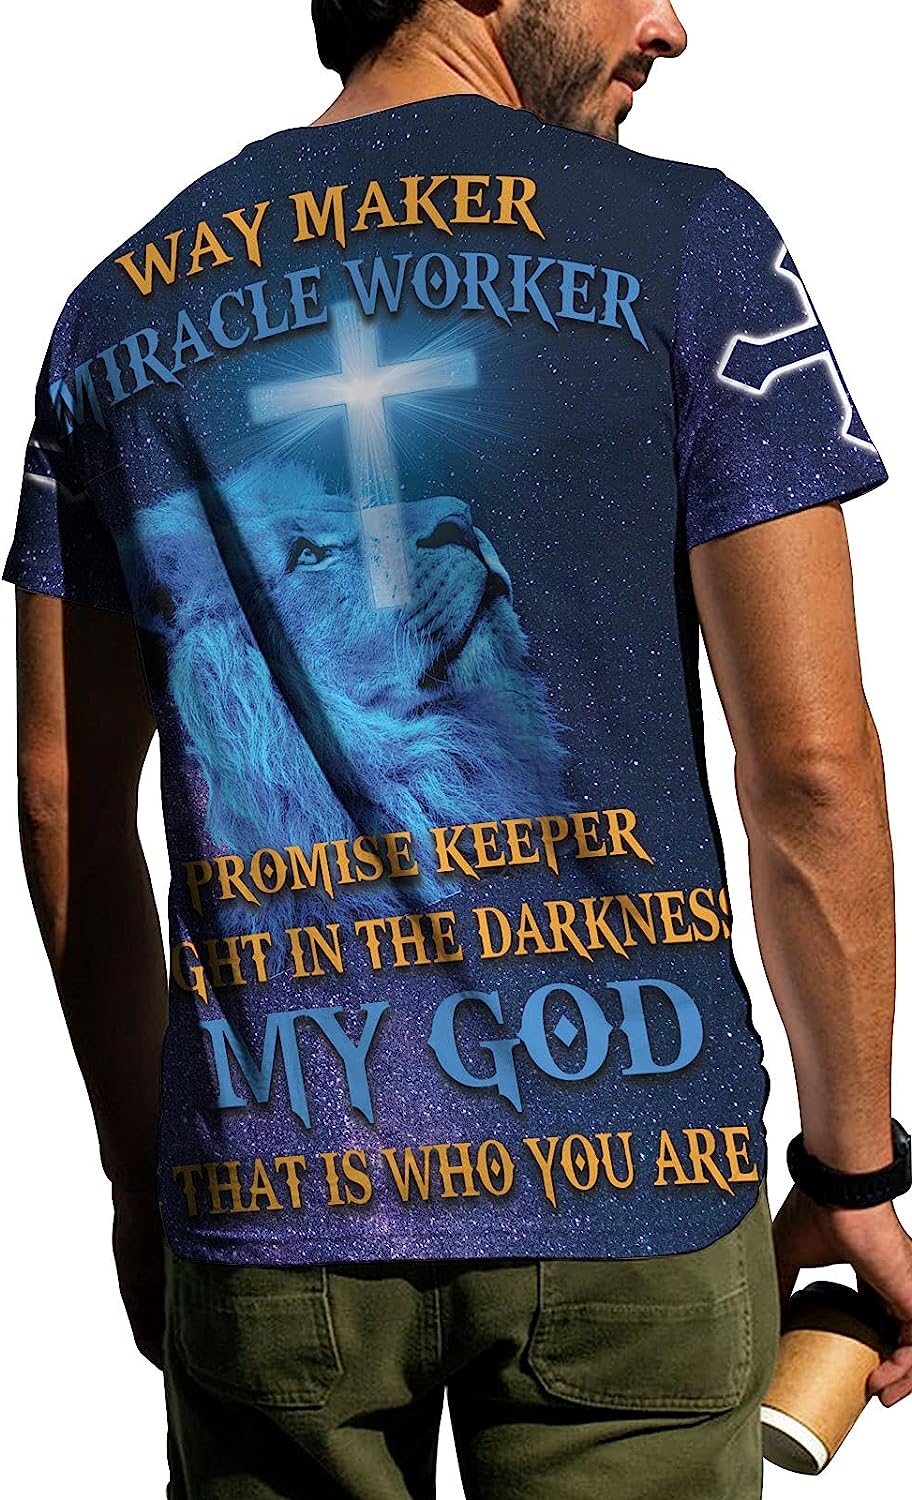 Lion Jesus Is My Savior Way Maker All Over Printed 3D T Shirt - Christian Shirts for Men Women